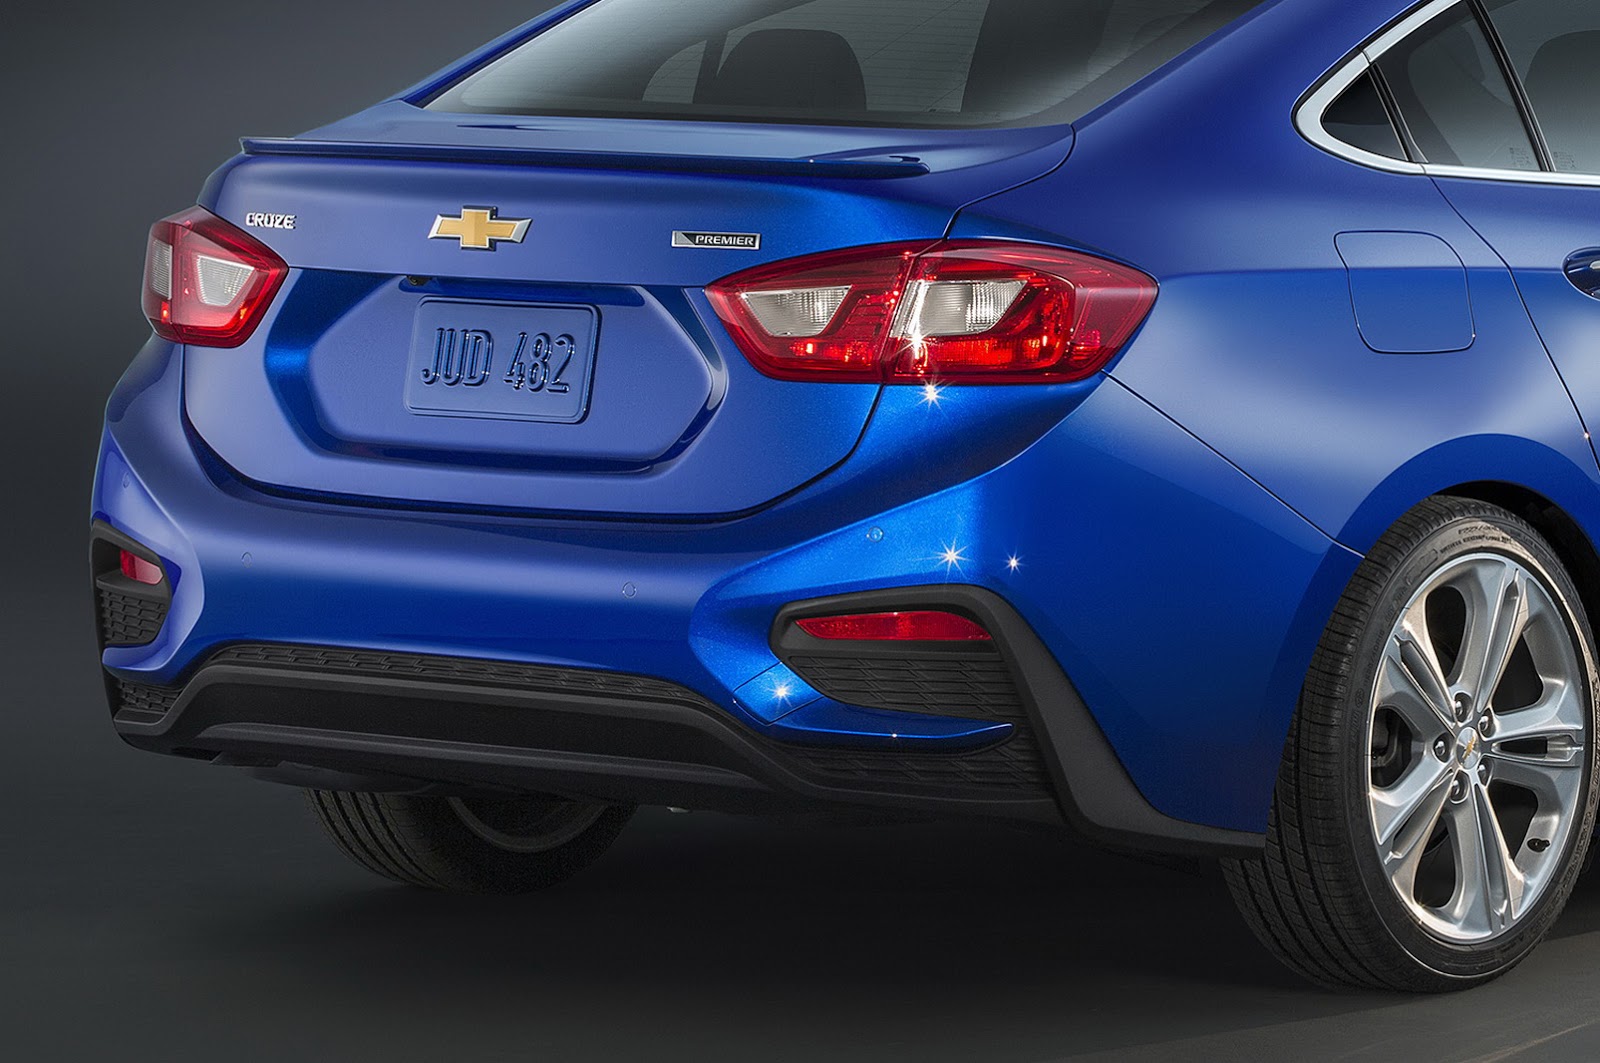 2016 Chevrolet Cruze rear official image